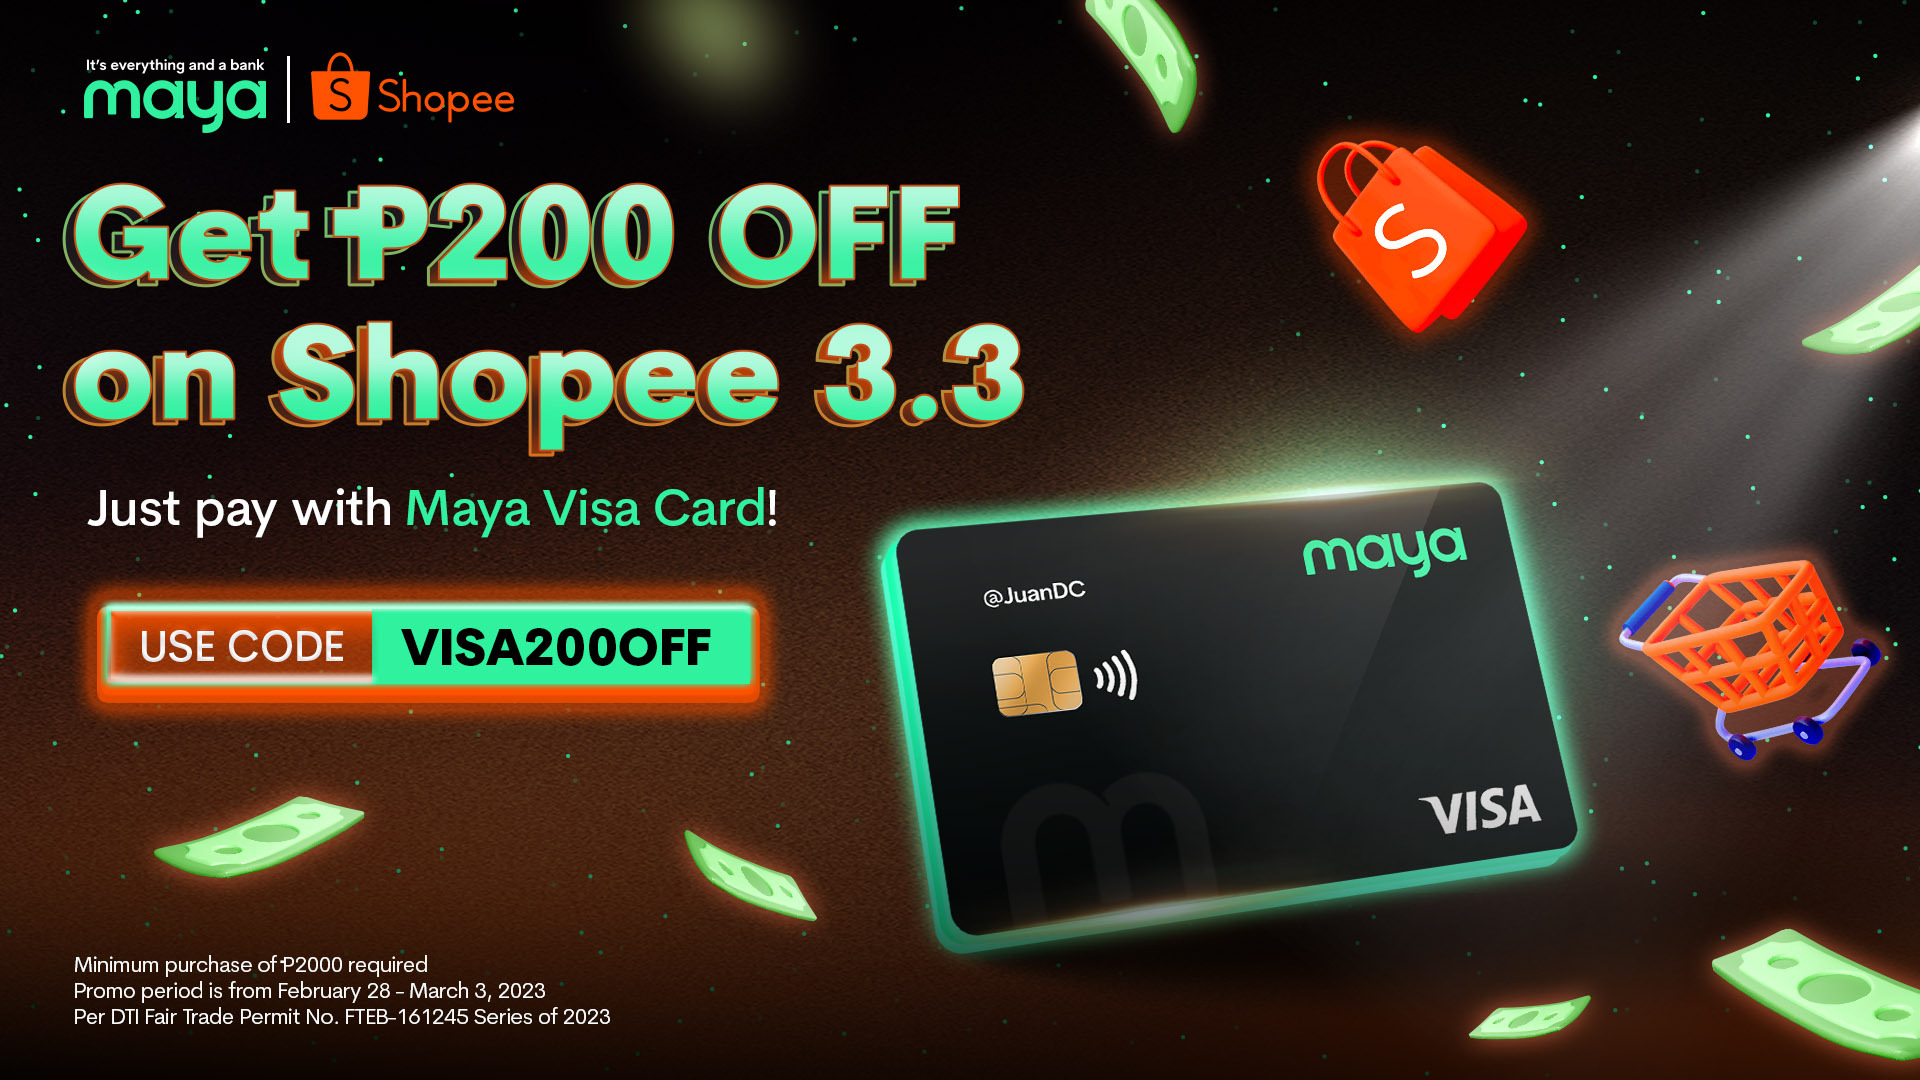 Get P200 OFF on Shopee with your Maya Visa Card!